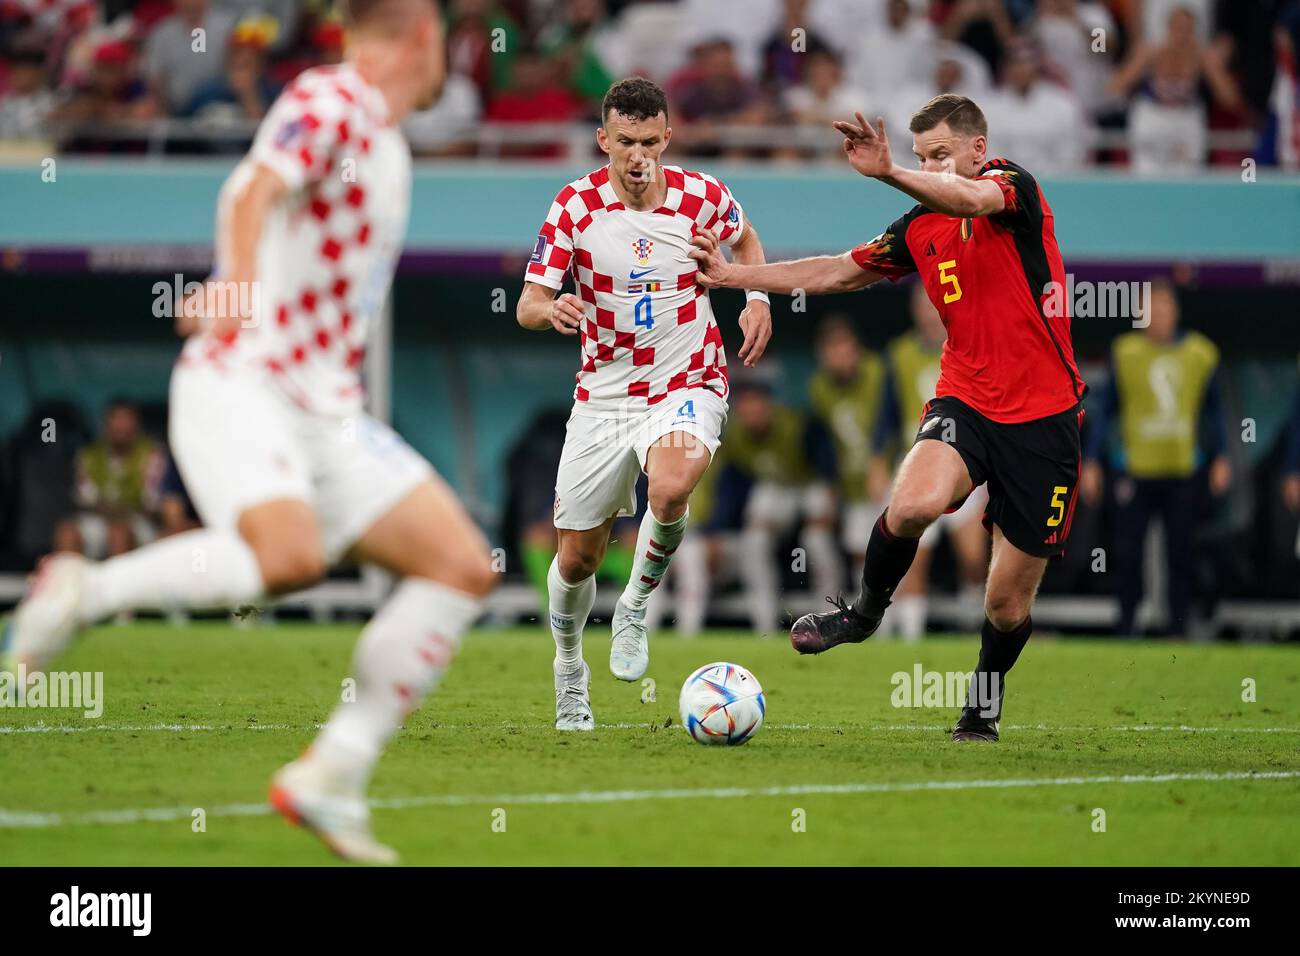 DOHA, QATAR - DECEMBER 1: Player of Croatia  Ivan Perisic fights for the ball with player of Belgium Jan Vertonghen during the FIFA World Cup Qatar 2022 group F match between Croatia and Belgium at Ahmad Bin Ali Stadium on December 1, 2022 in Doha, Qatar. (Photo by Florencia Tan Jun/PxImages) Stock Photo